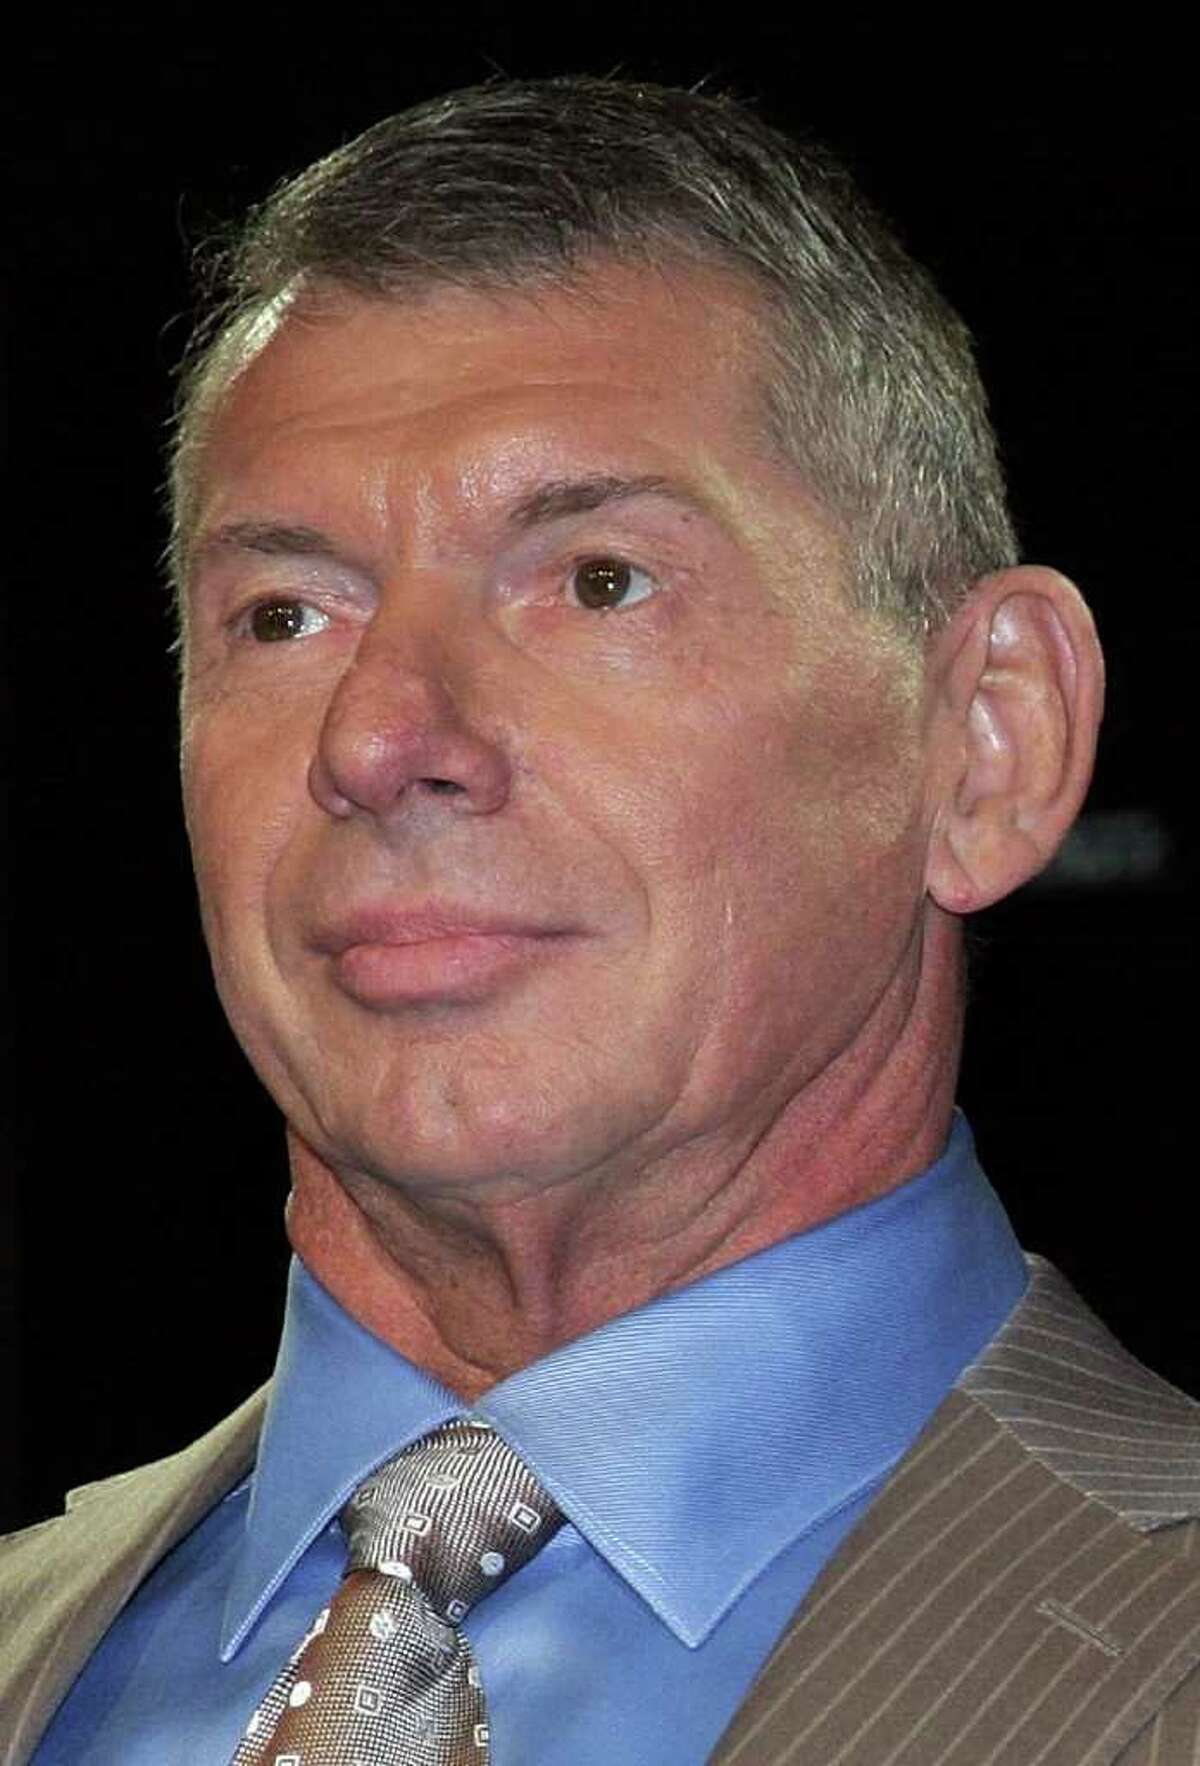 WWE Chairman Vince McMahon June 12, 2008 at the Hard Rock Cafe in New York City.